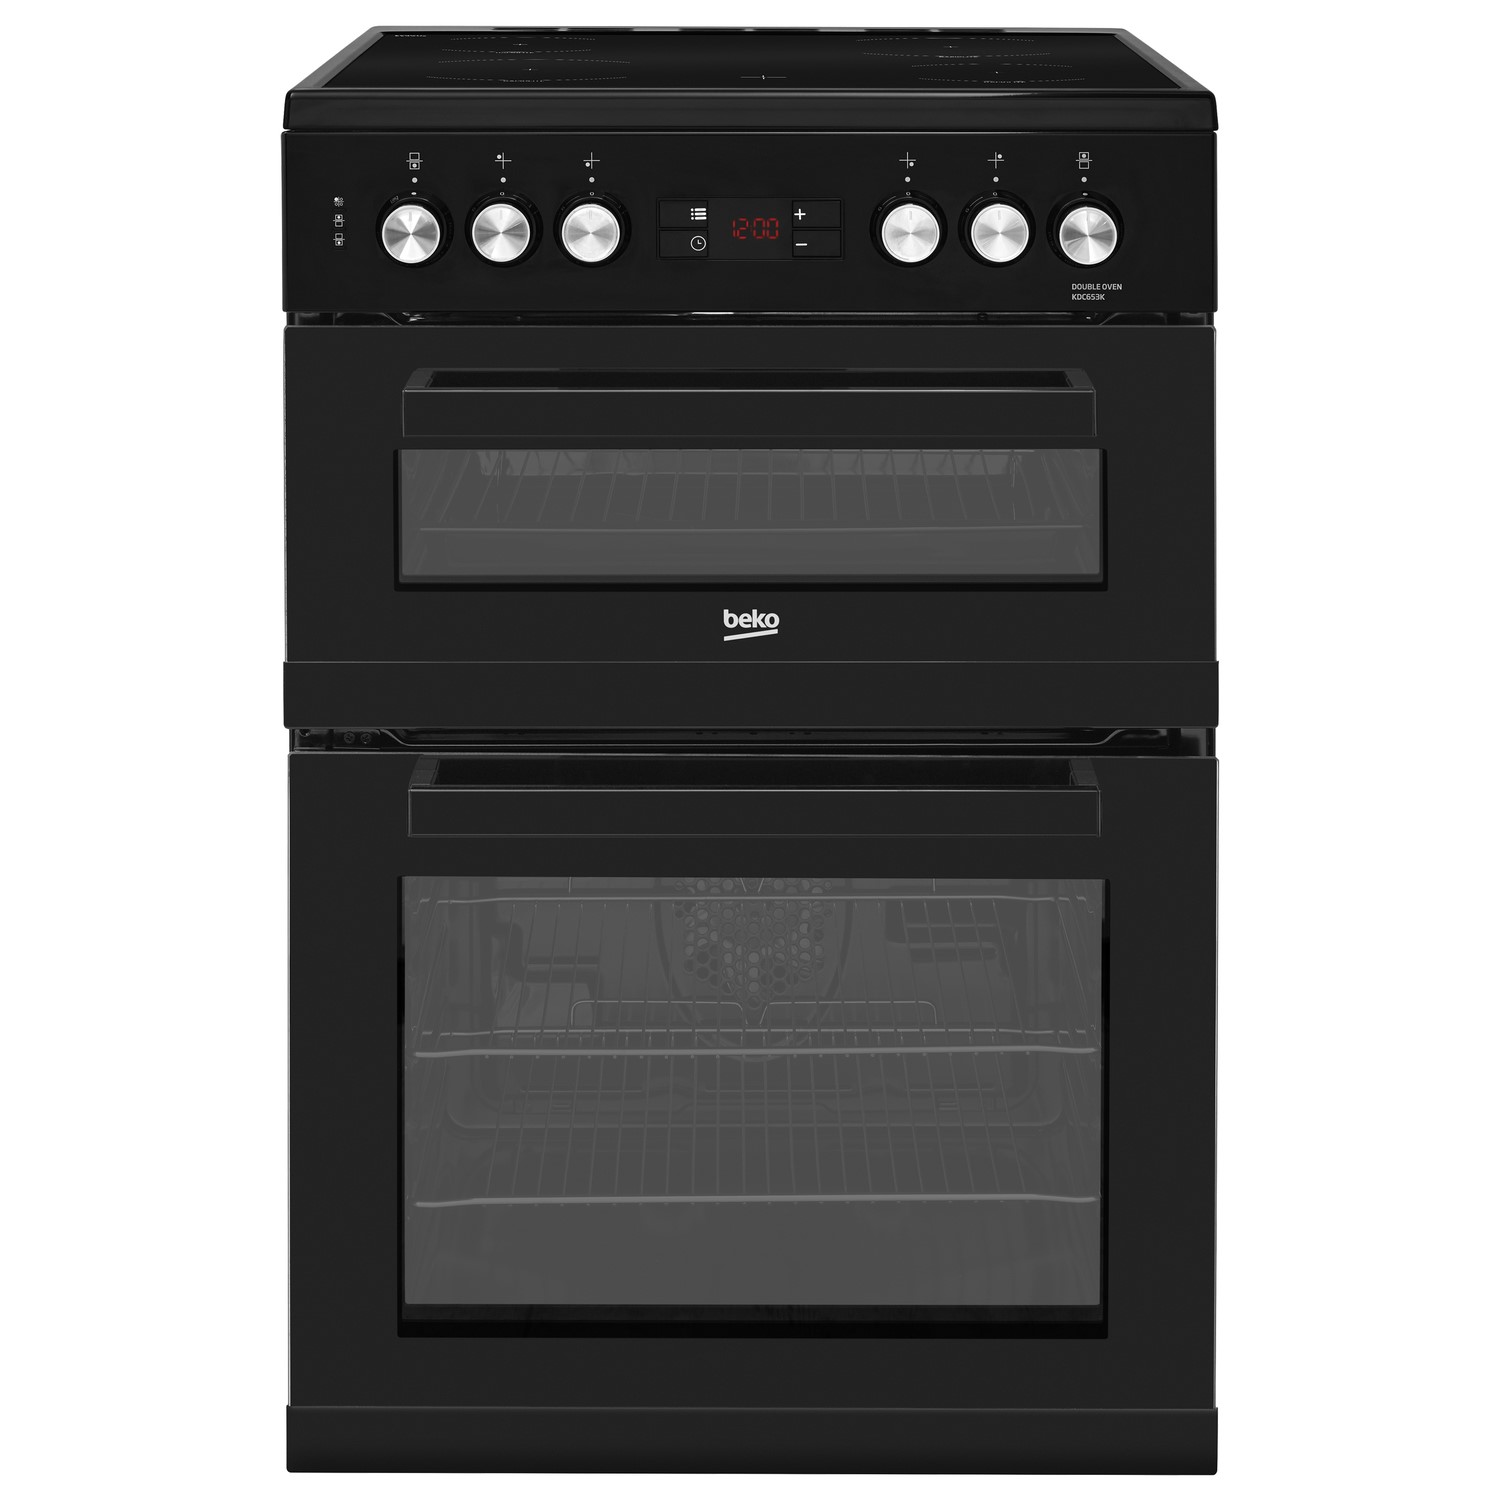 Beko KDC653K 60cm Electric Cooker with Ceramic Hob - Black - A/A Rated